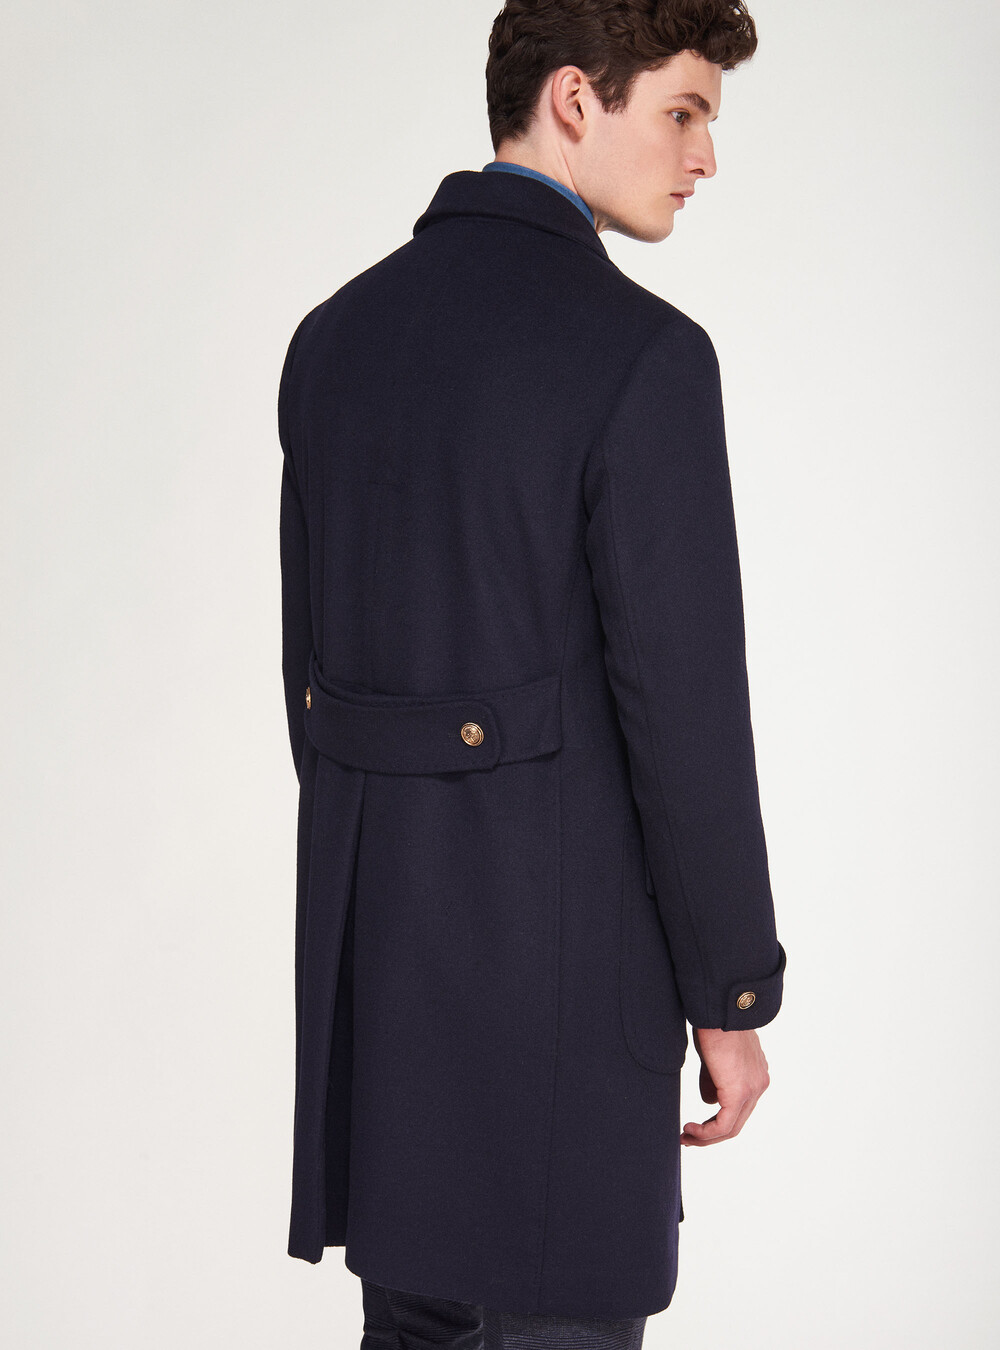 Navy blue wool and cashmere double-breasted coat